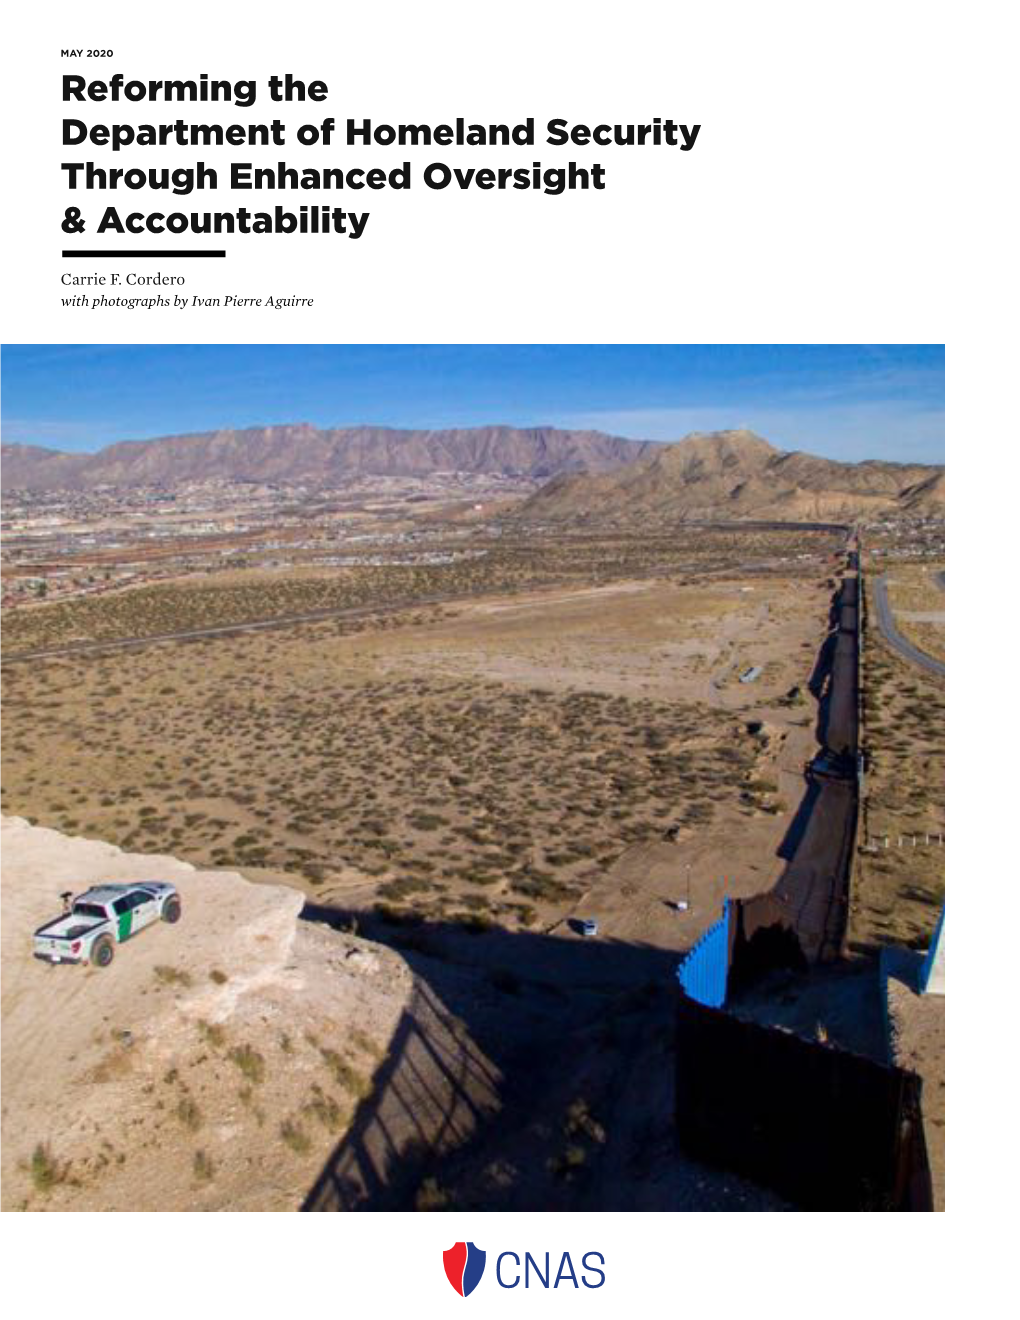 Reforming the Department of Homeland Security Through Enhanced Oversight & Accountability